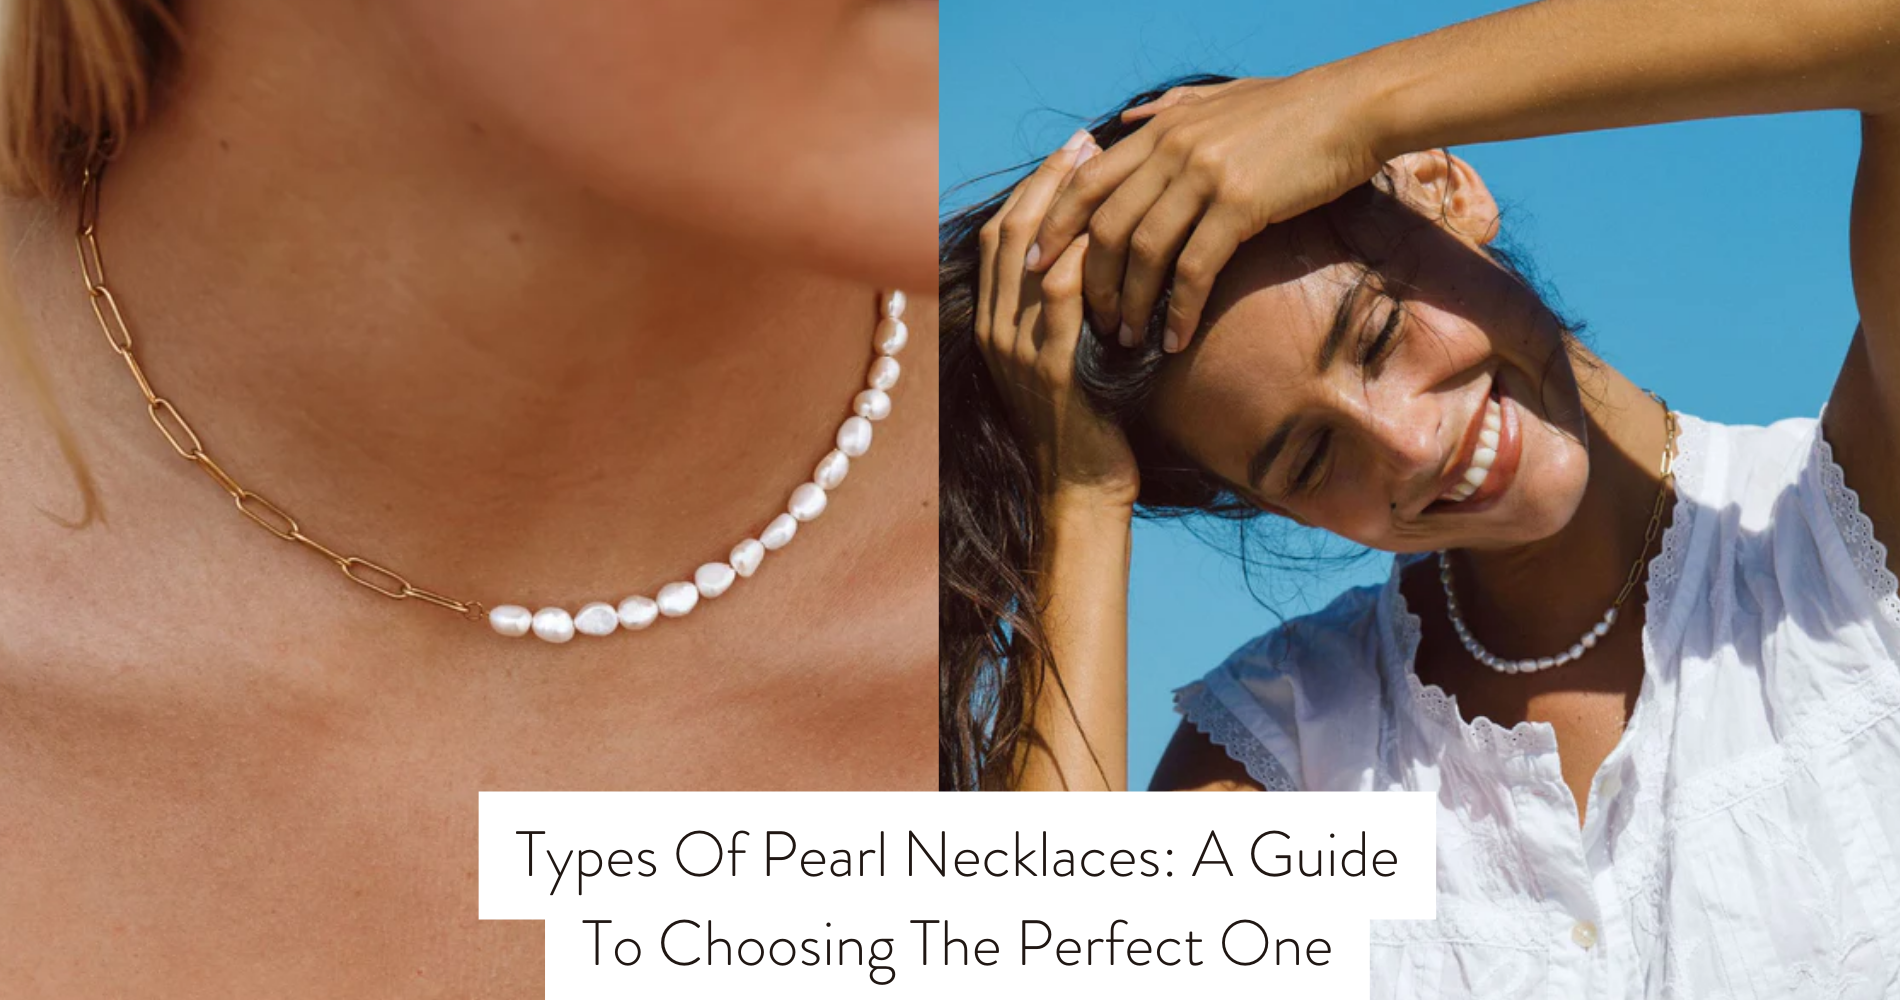 Types Of Pearl Necklaces: A Guide To Choosing The Perfect One